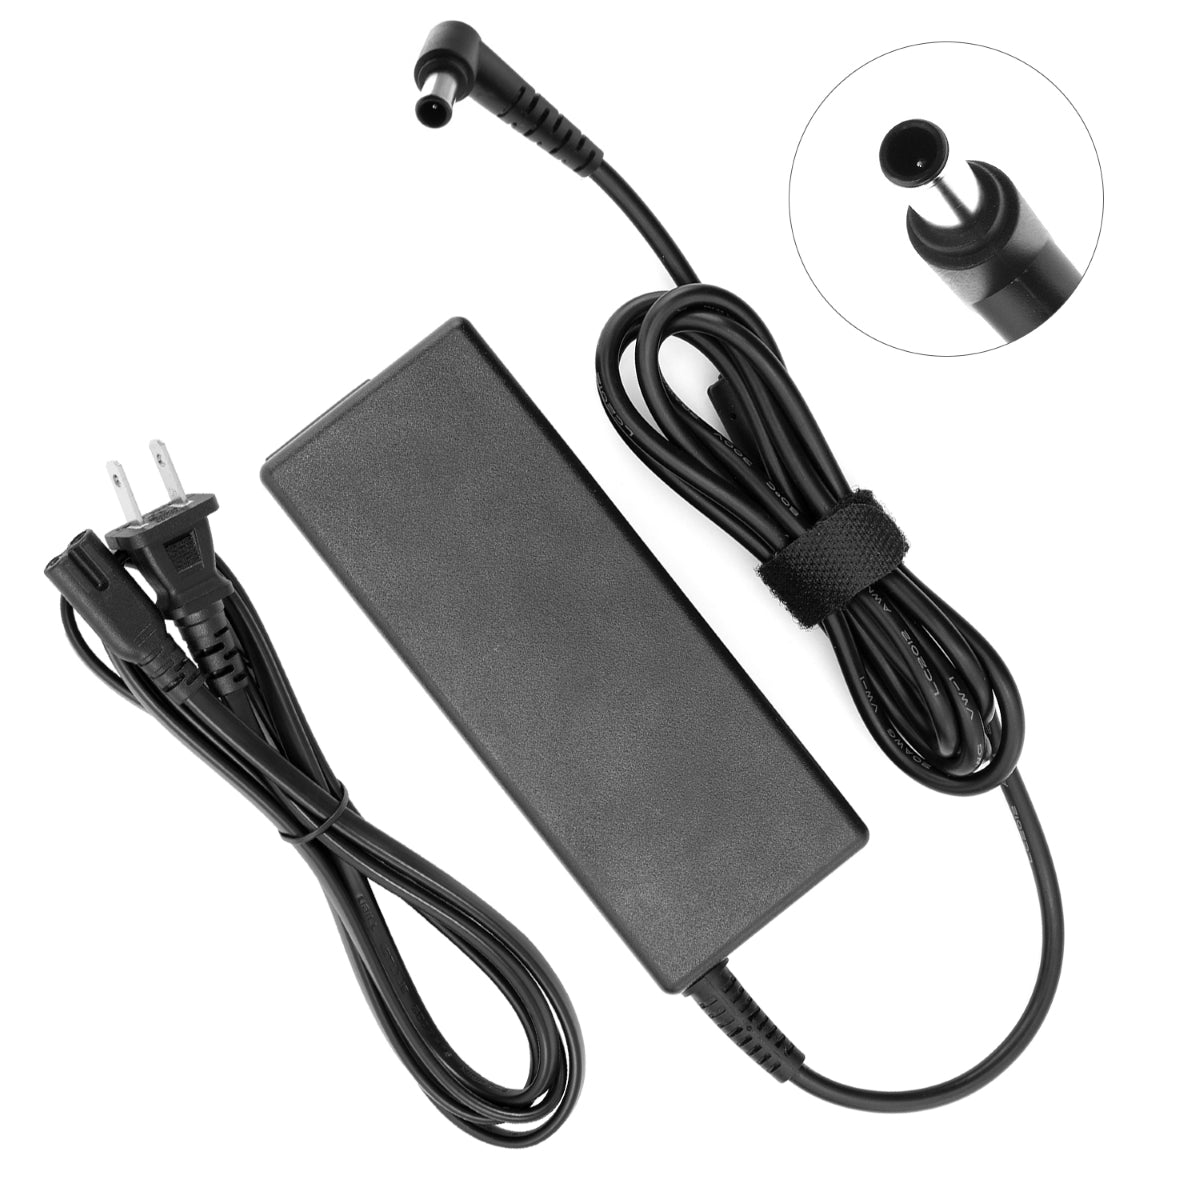 AC Adapter Power Supply for Samsung S23B300B Monitor